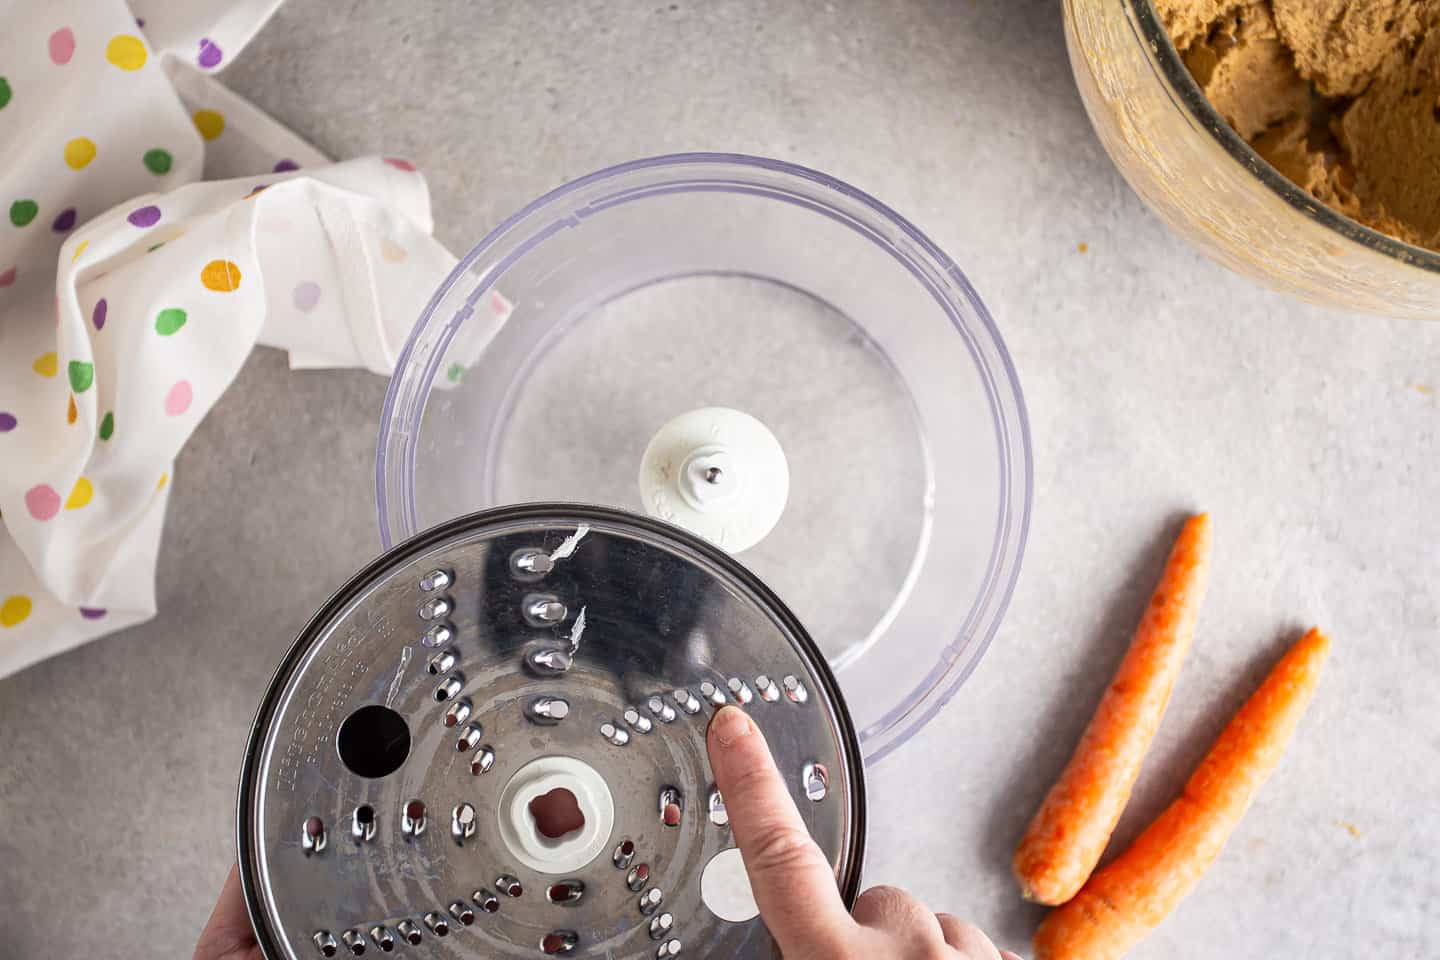 Preparing to grate carrots with a fine food processor blade.